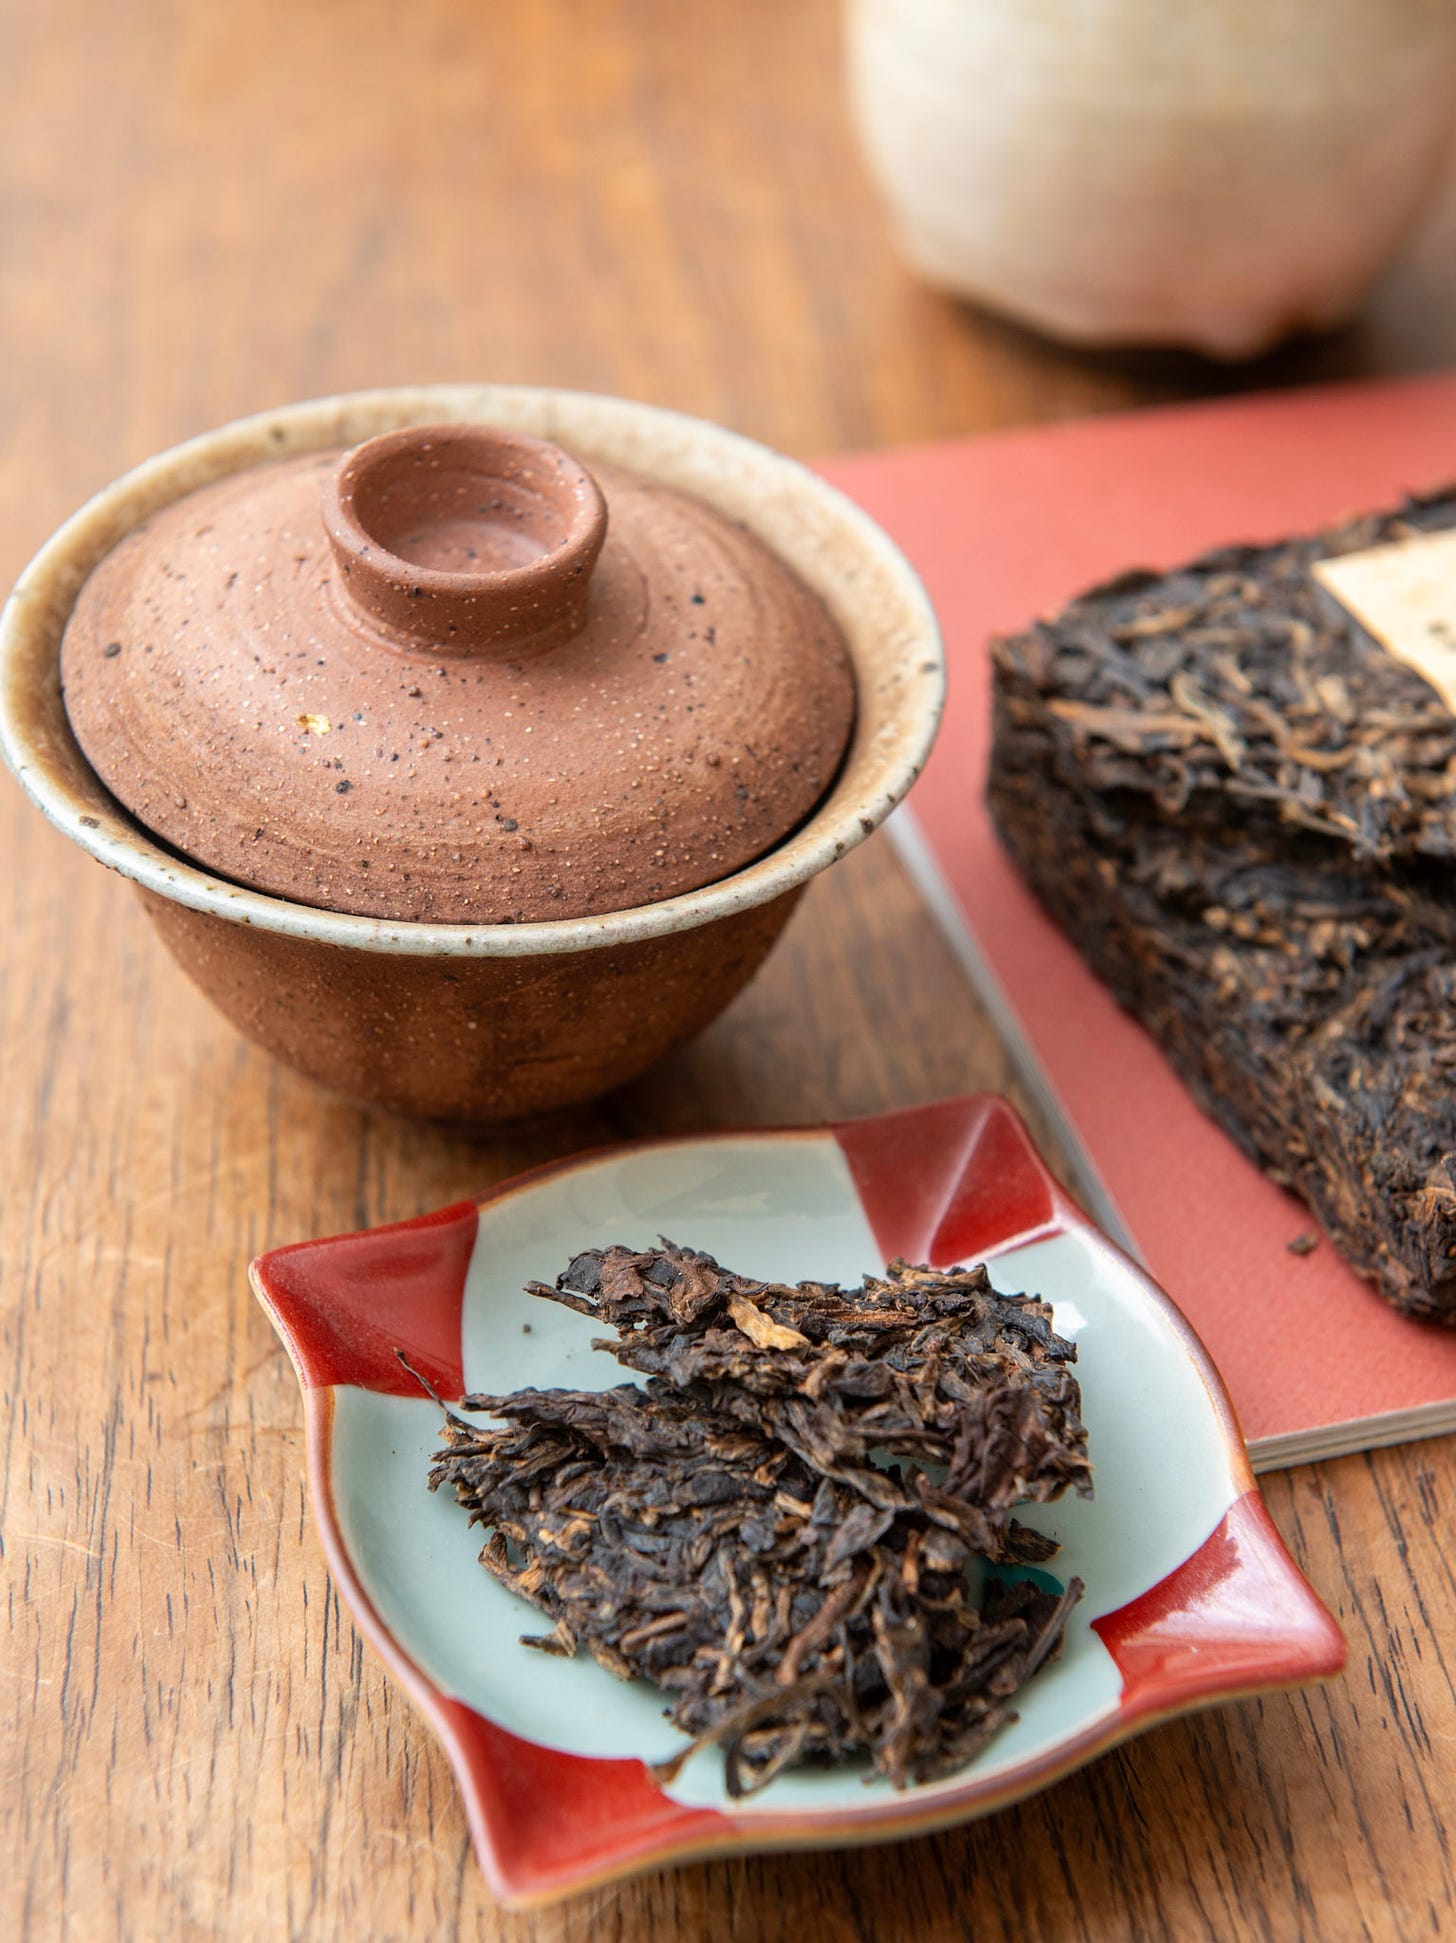 ID: A portion of Mengku puer brick dry leaf